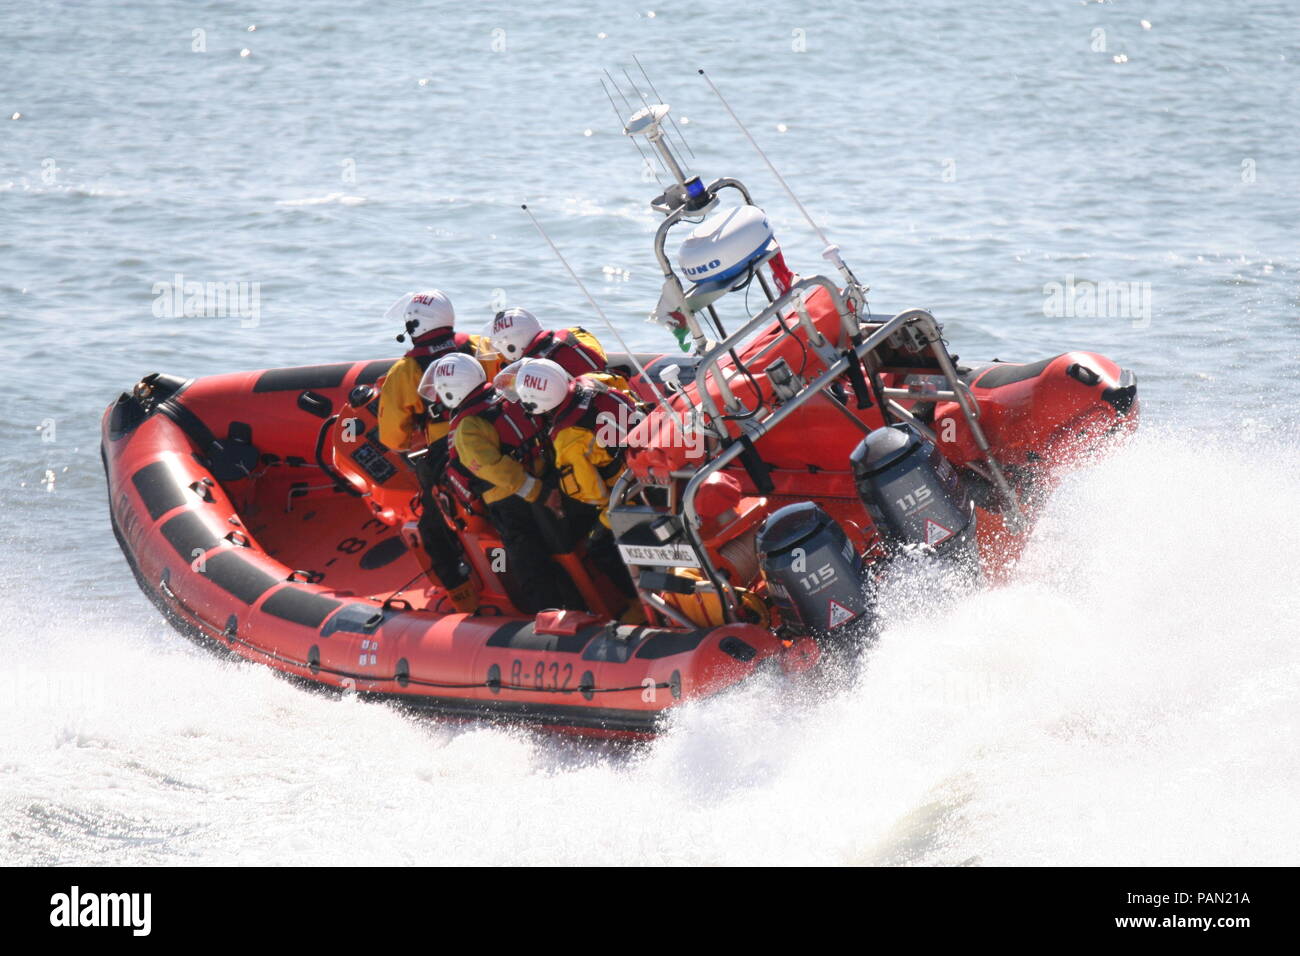 launch of a south wales life boat on the welsh coast  at Porthcawl, on a safety fest day organised by all the emergency services Stock Photo